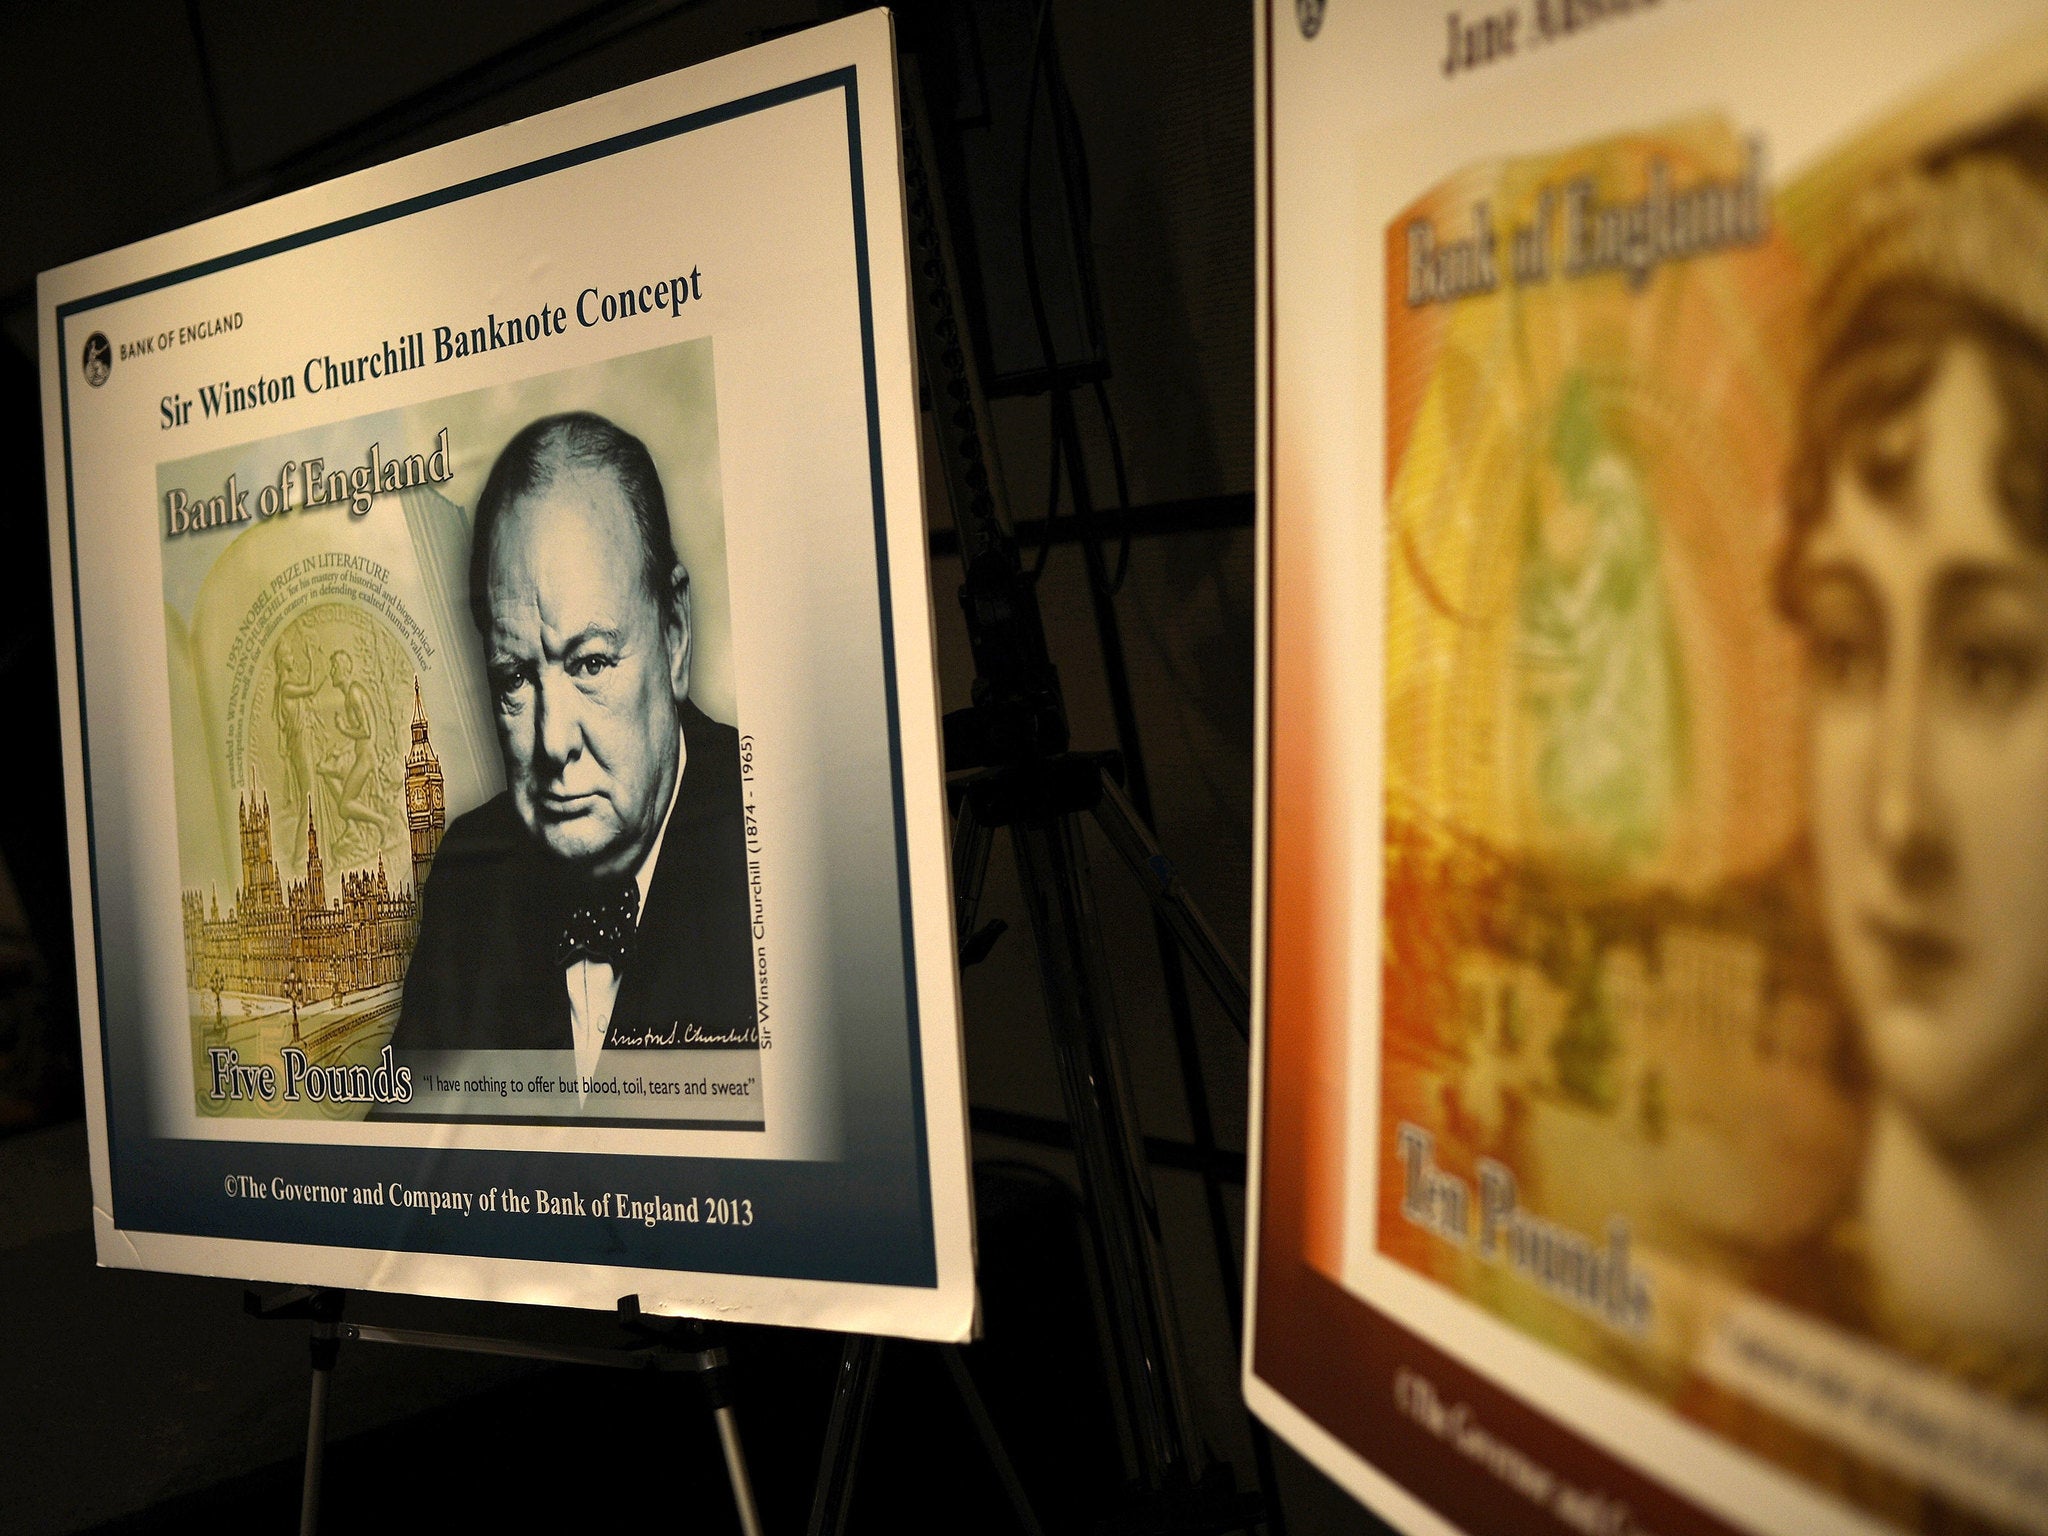 The Bank of England plans to introduce plastic bank notes from 2016 with a new £5 note featuring Sir Winston Churchill. A £10 note will follow a year later, featuring Jane Austen.